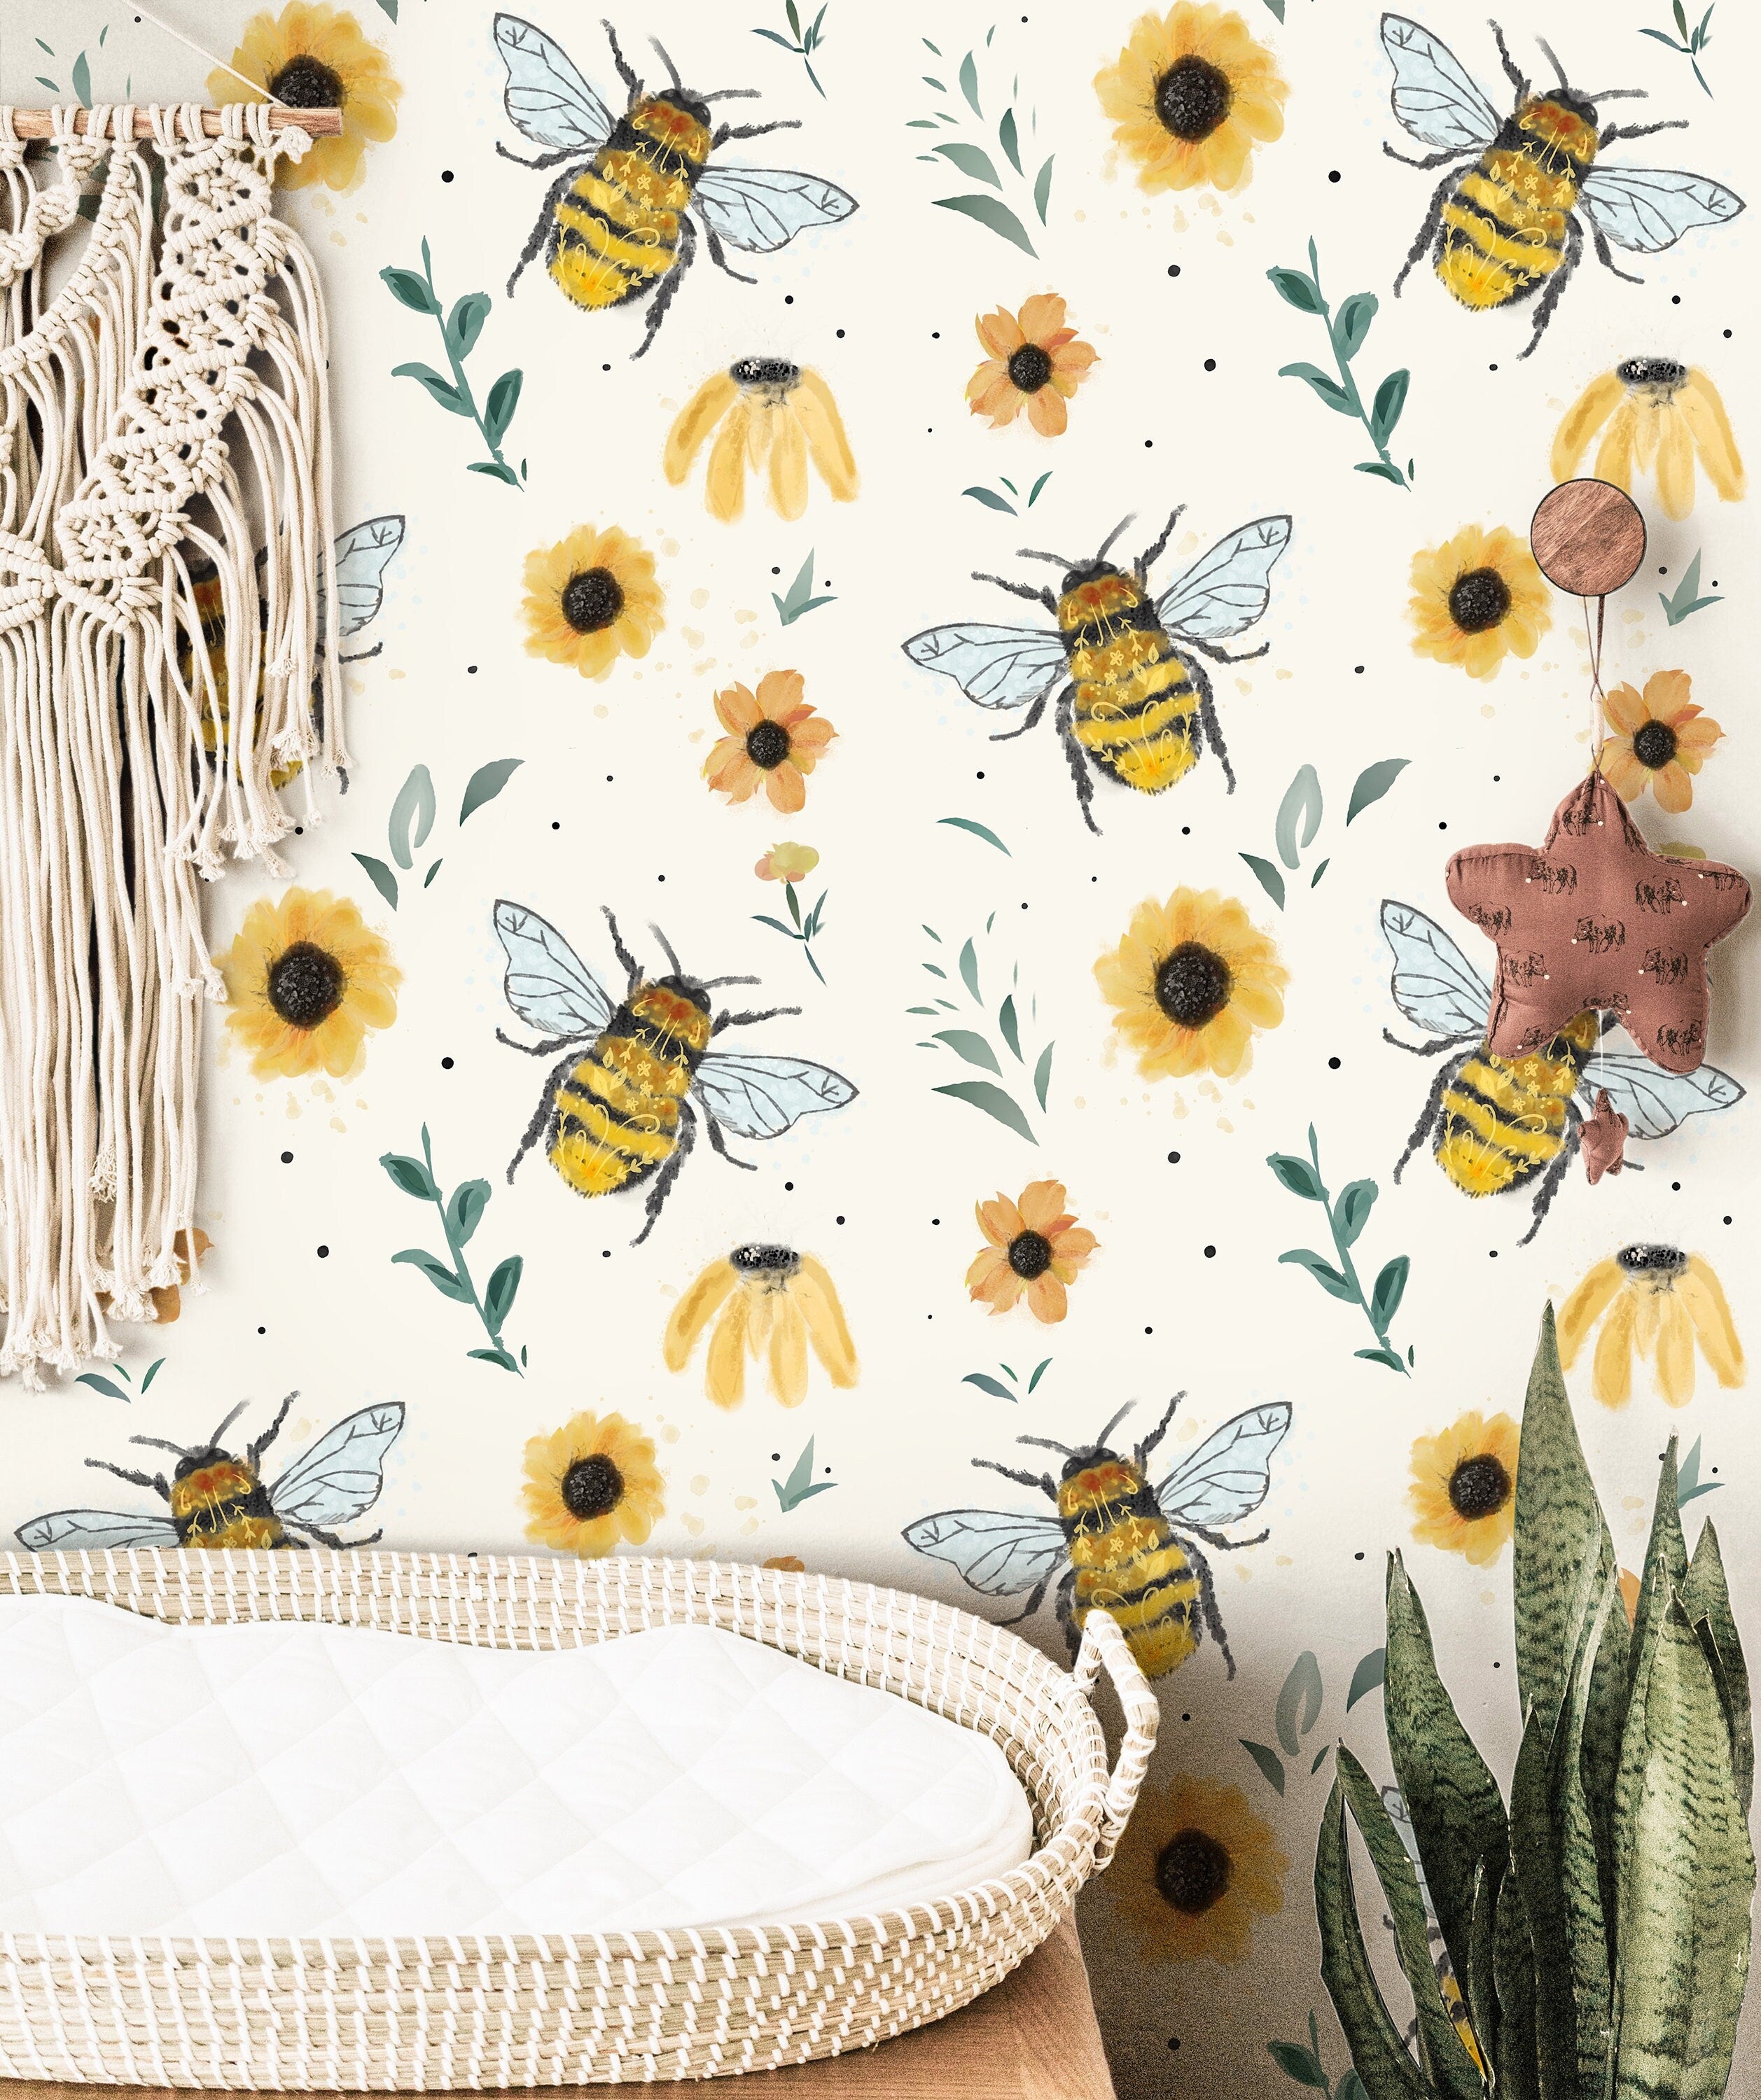 Bumble Bee Floral Cream Wallpaper | Girls Nursery Wallpaper | Kids Wallpaper | Childrens Wallpaper | Peel Stick Removable Wallpaper | 132